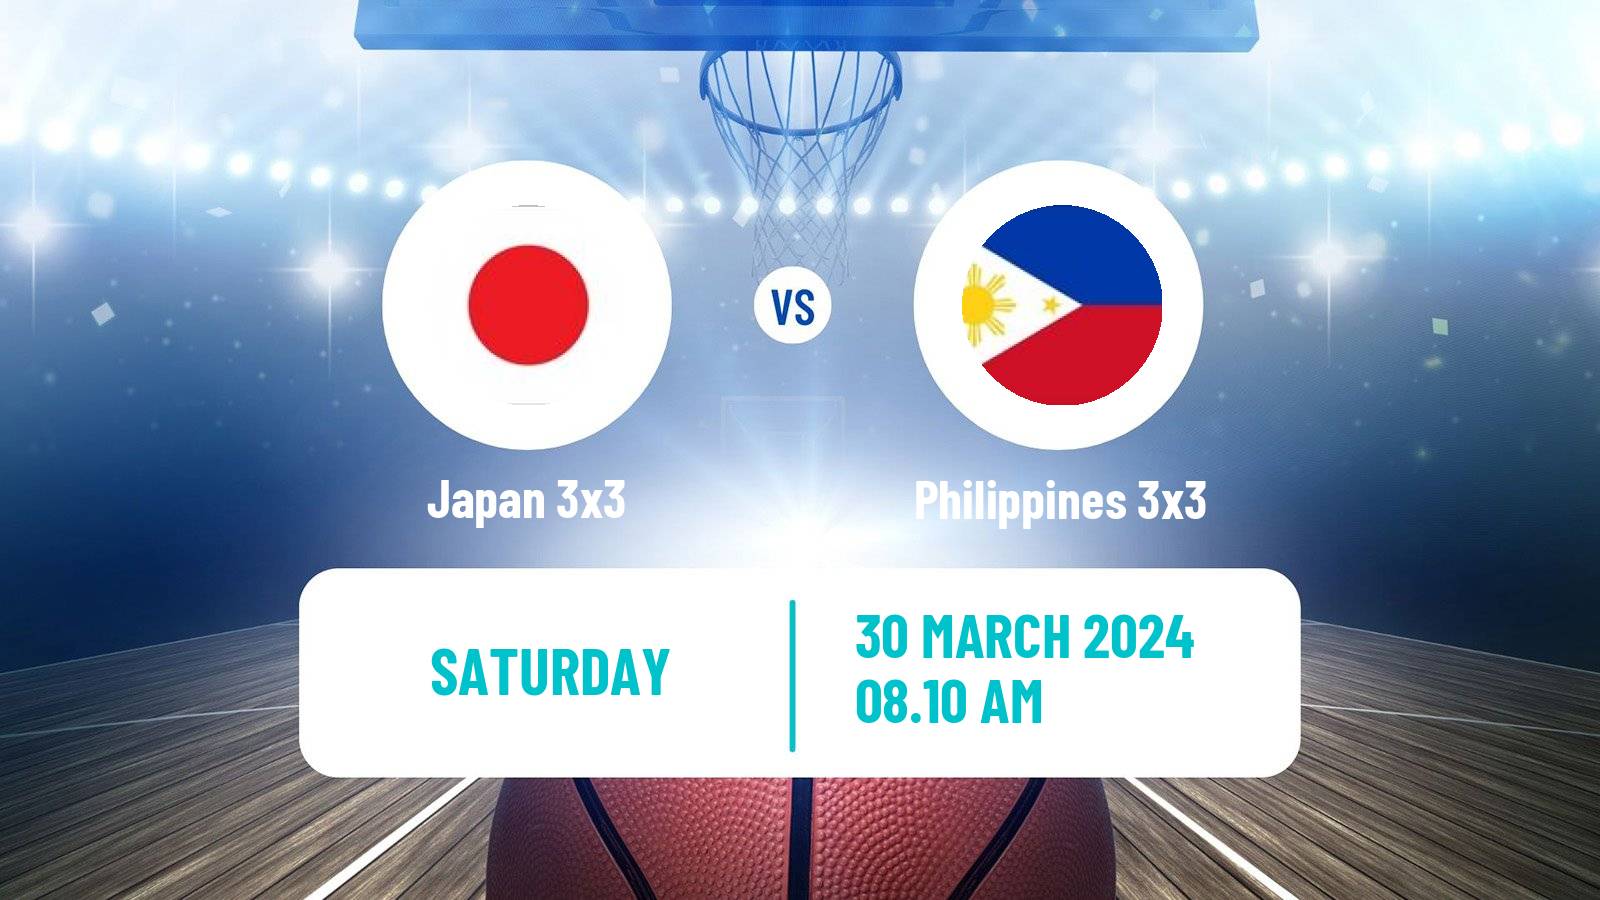 Basketball Asia Cup 3x3 Japan 3x3 - Philippines 3x3